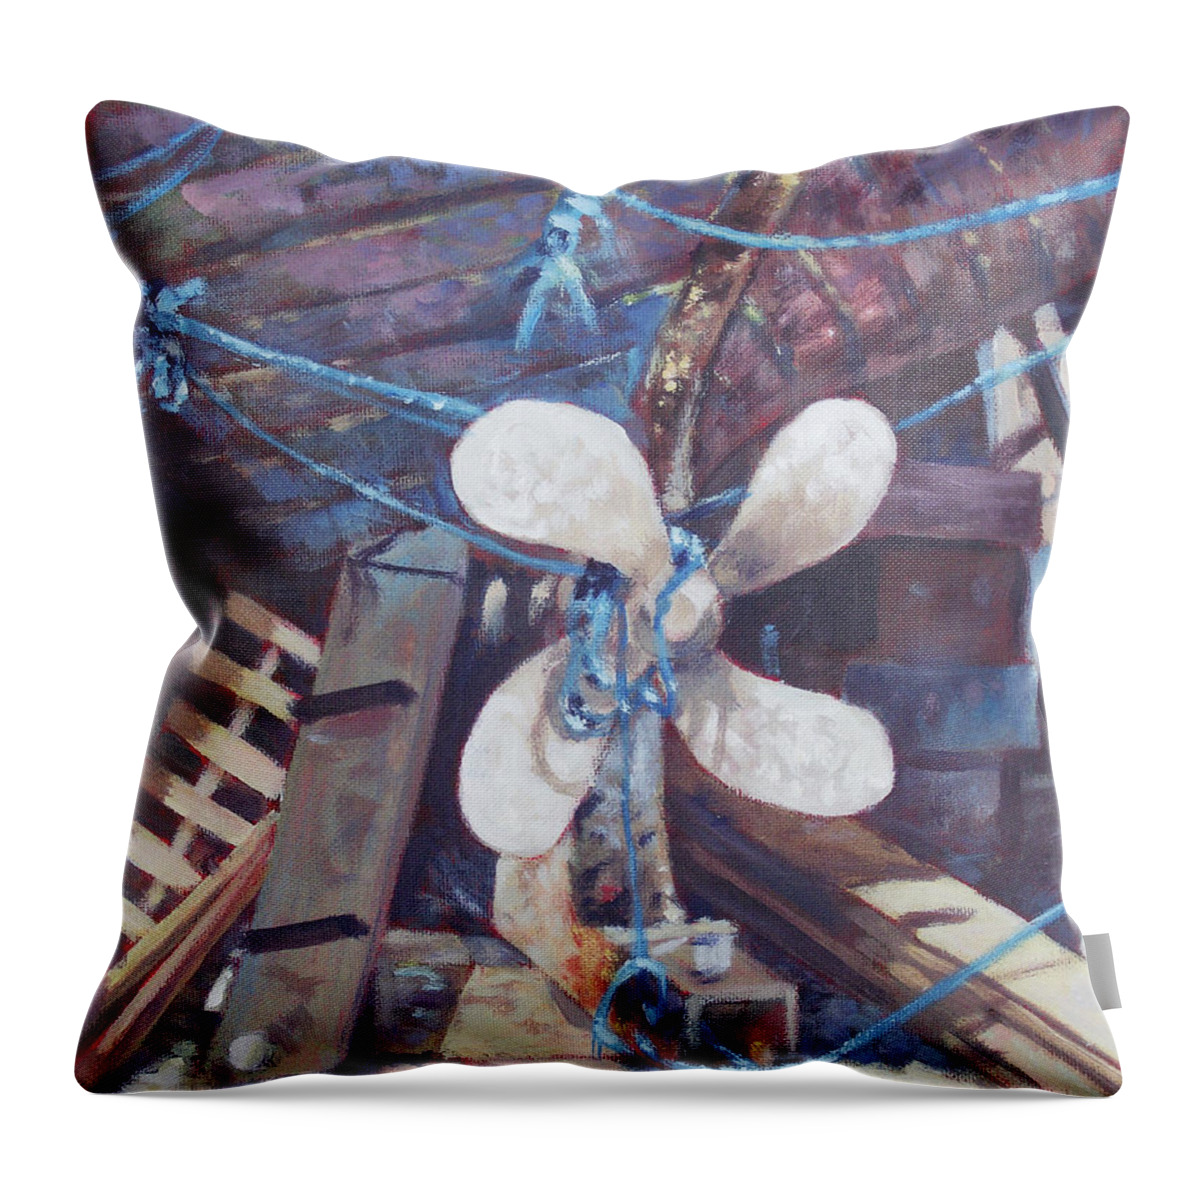 Boat Throw Pillow featuring the painting Old Boat Propeller by Martin Davey